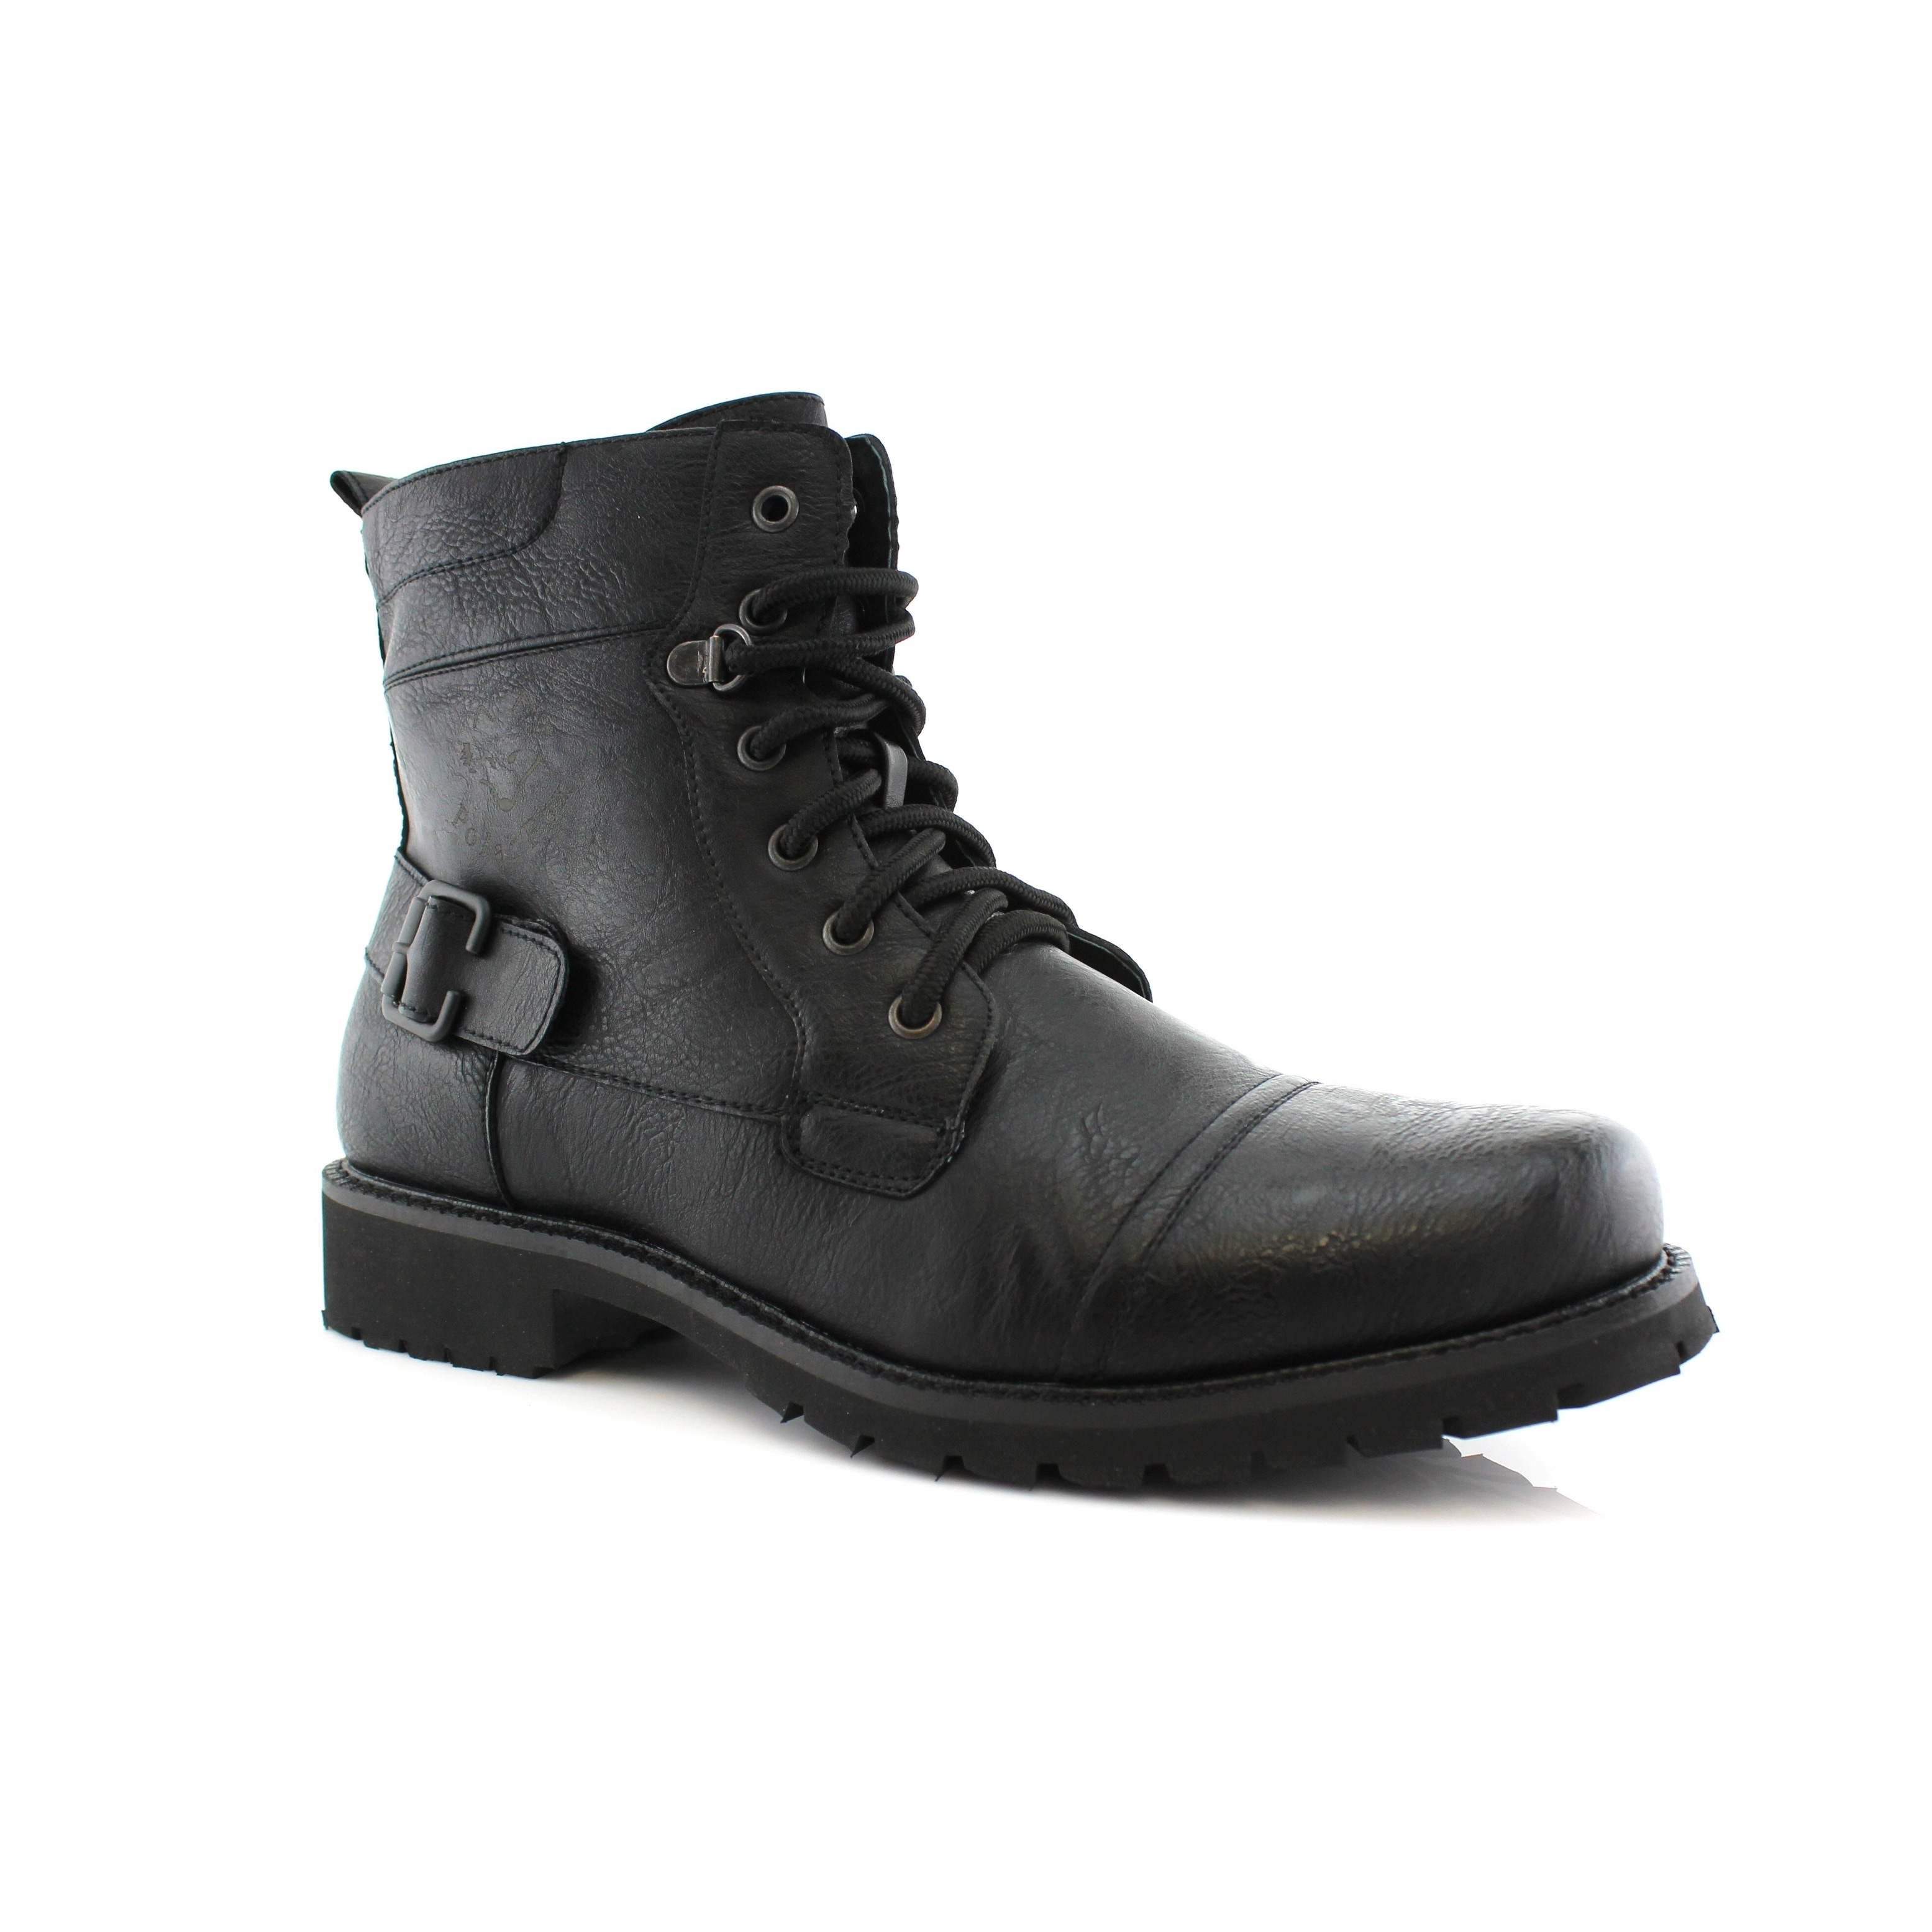 black combat boots for boys